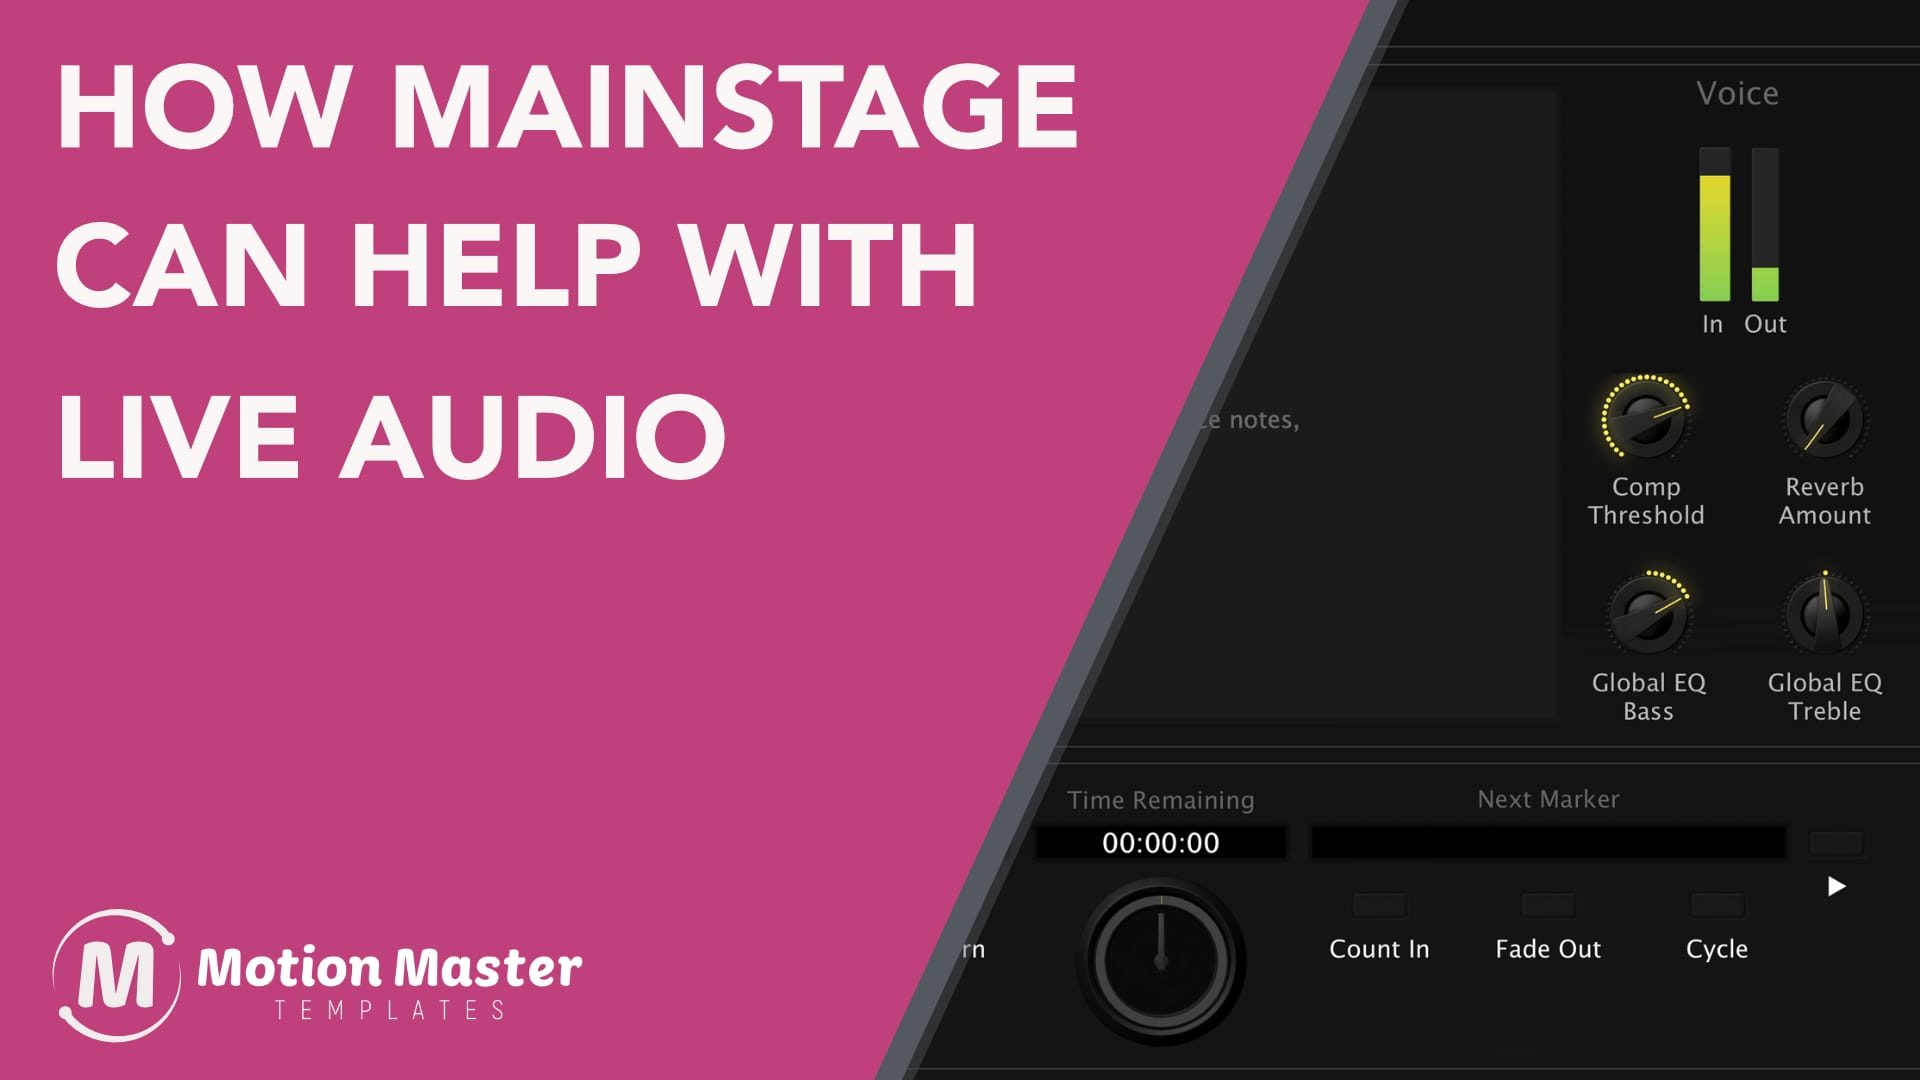 How Apples MainStage can help with Live Audio | Motion Master Templates | How Apple’s MainStage helps improve Live Audio | Animation Templates for Apple’s Final Cut & Motion Software